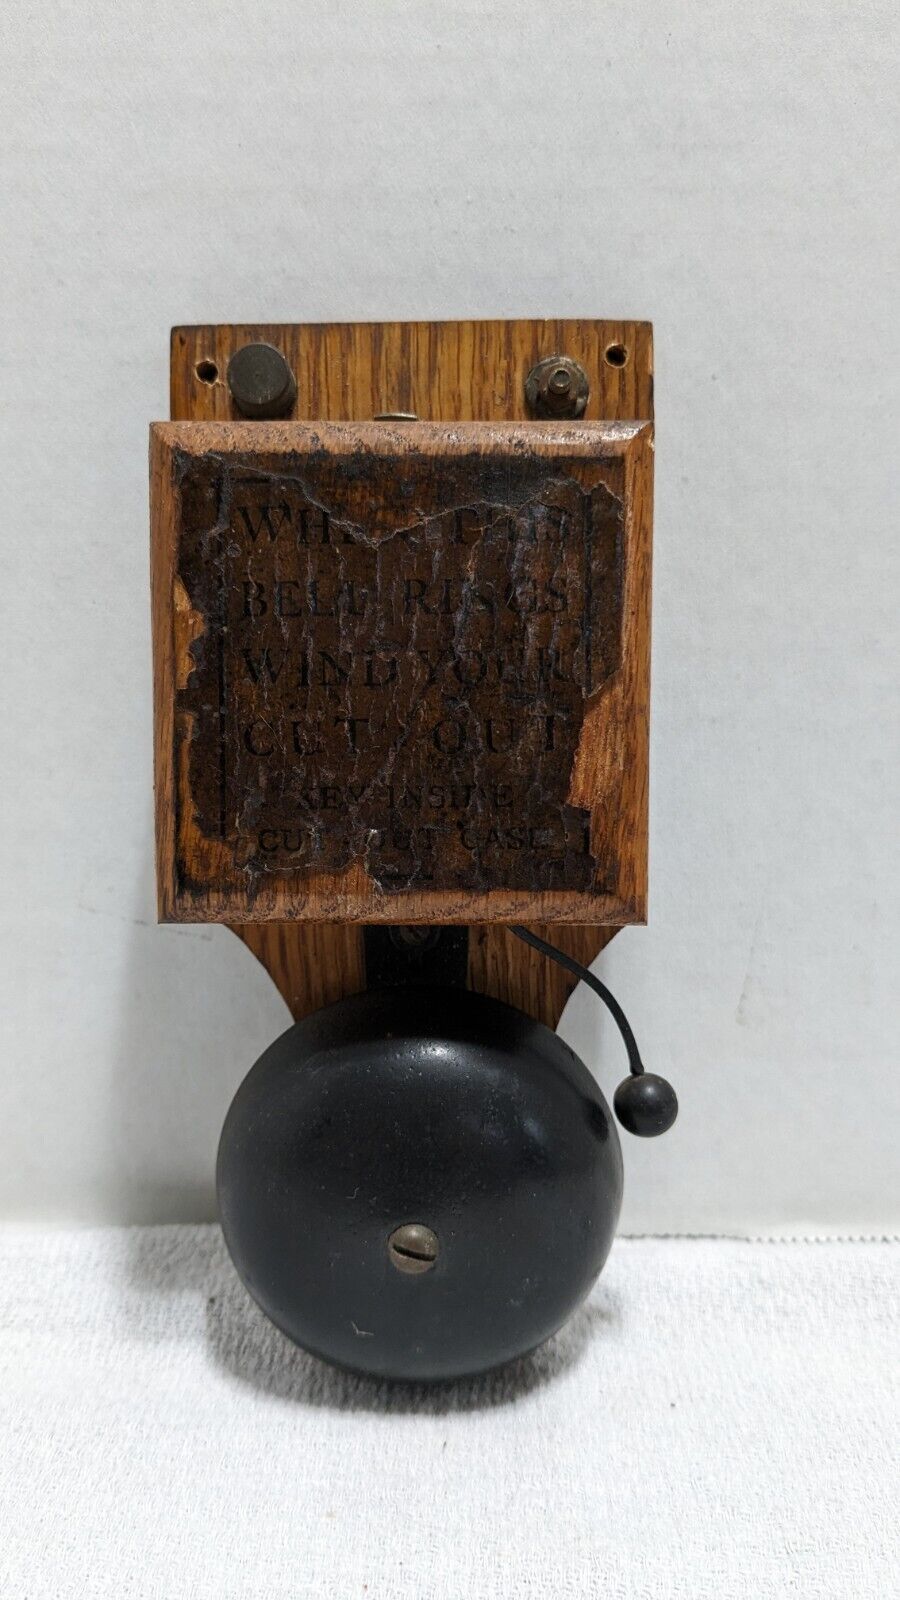 Antique Early Small Alarm Bell Wooden Case 